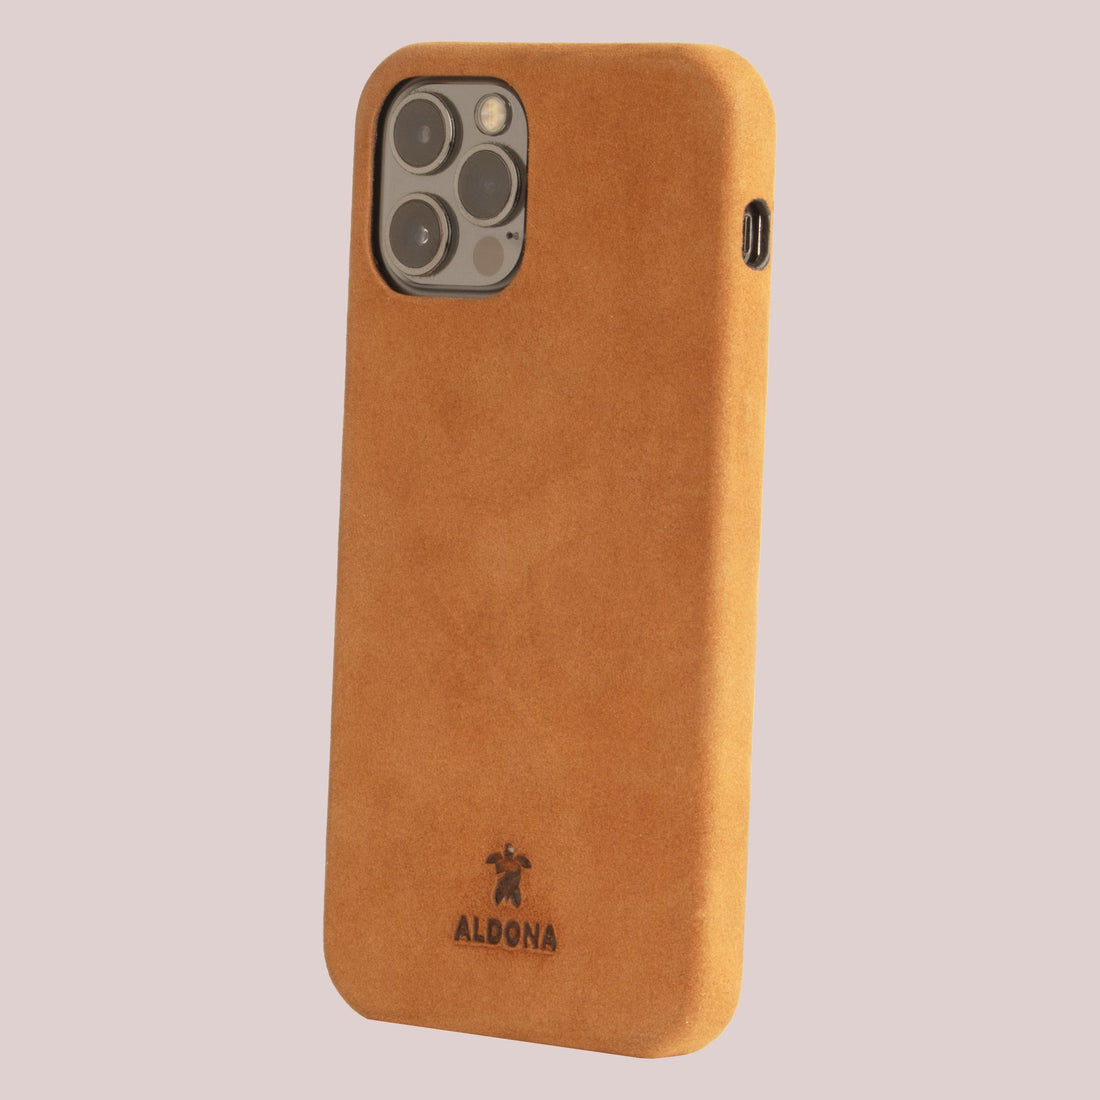 Kalon Case for iPhone 12 with MagSafe Compatibility - Burnt Tobacco